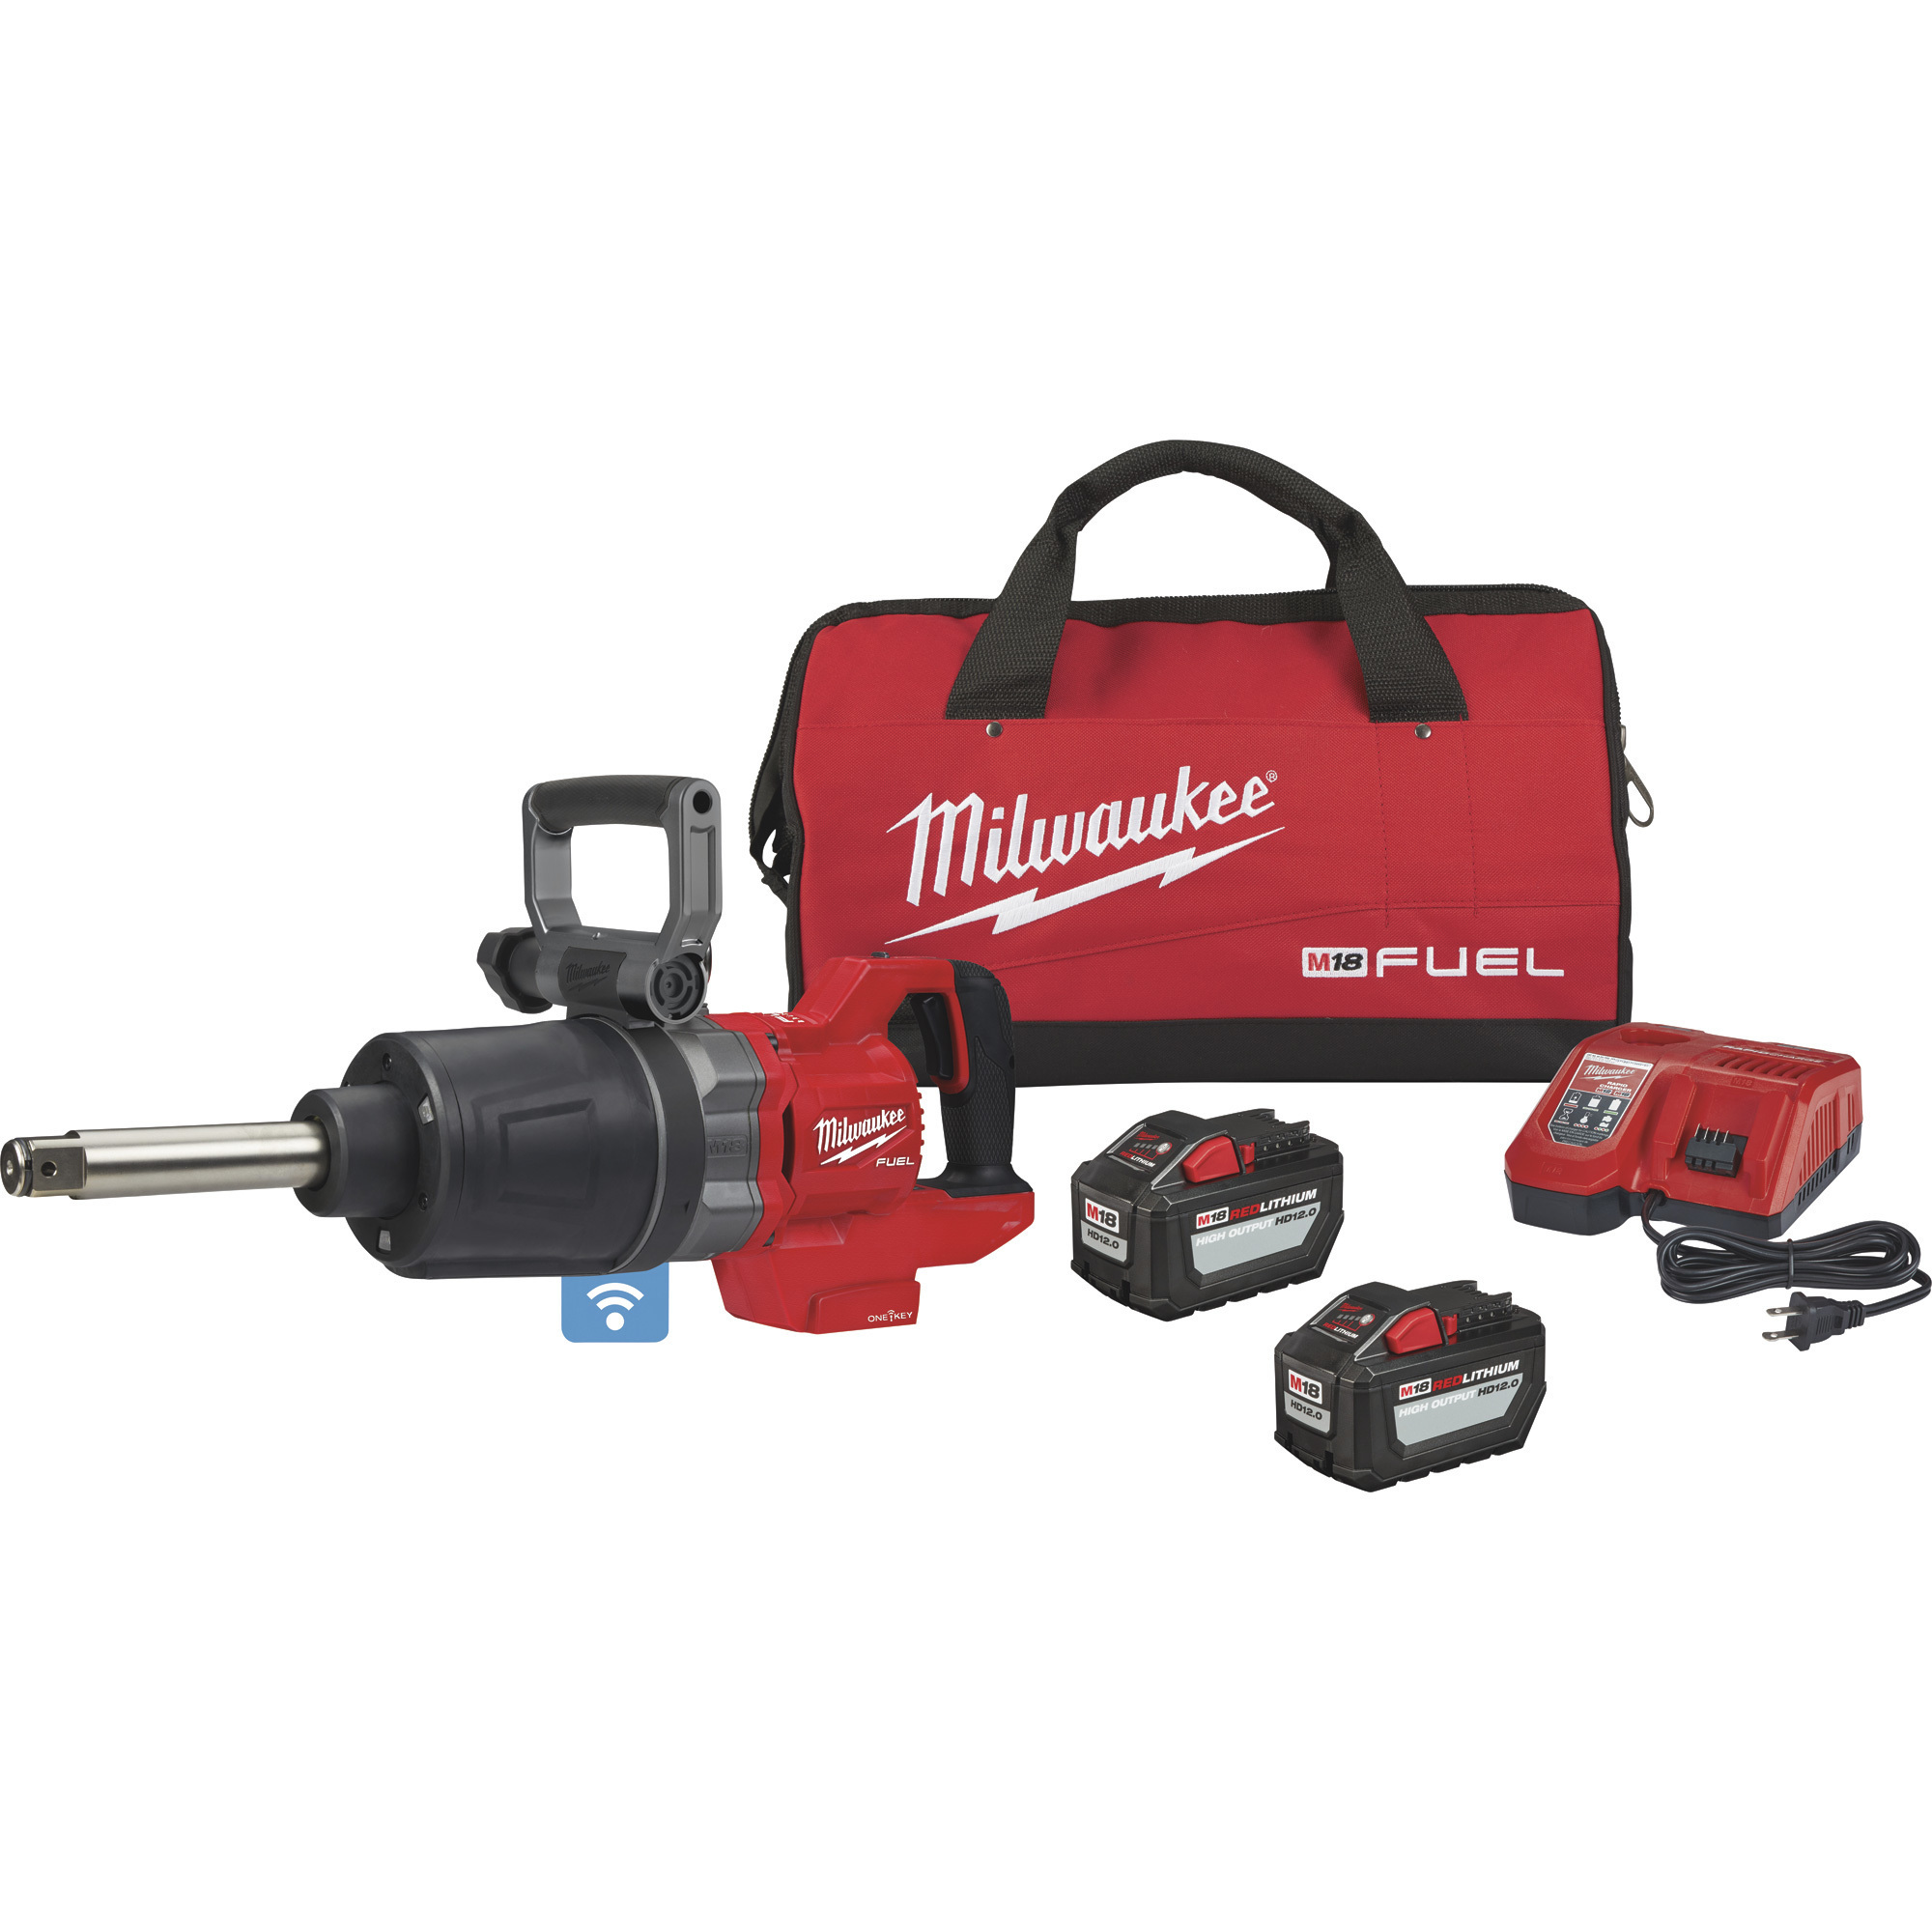 M18 FUEL 1Inch D-Handle Extended Anvil High-Torque Impact Wrench Kit with One-Key, Two Batteries, Model - Milwaukee 2869-22HD